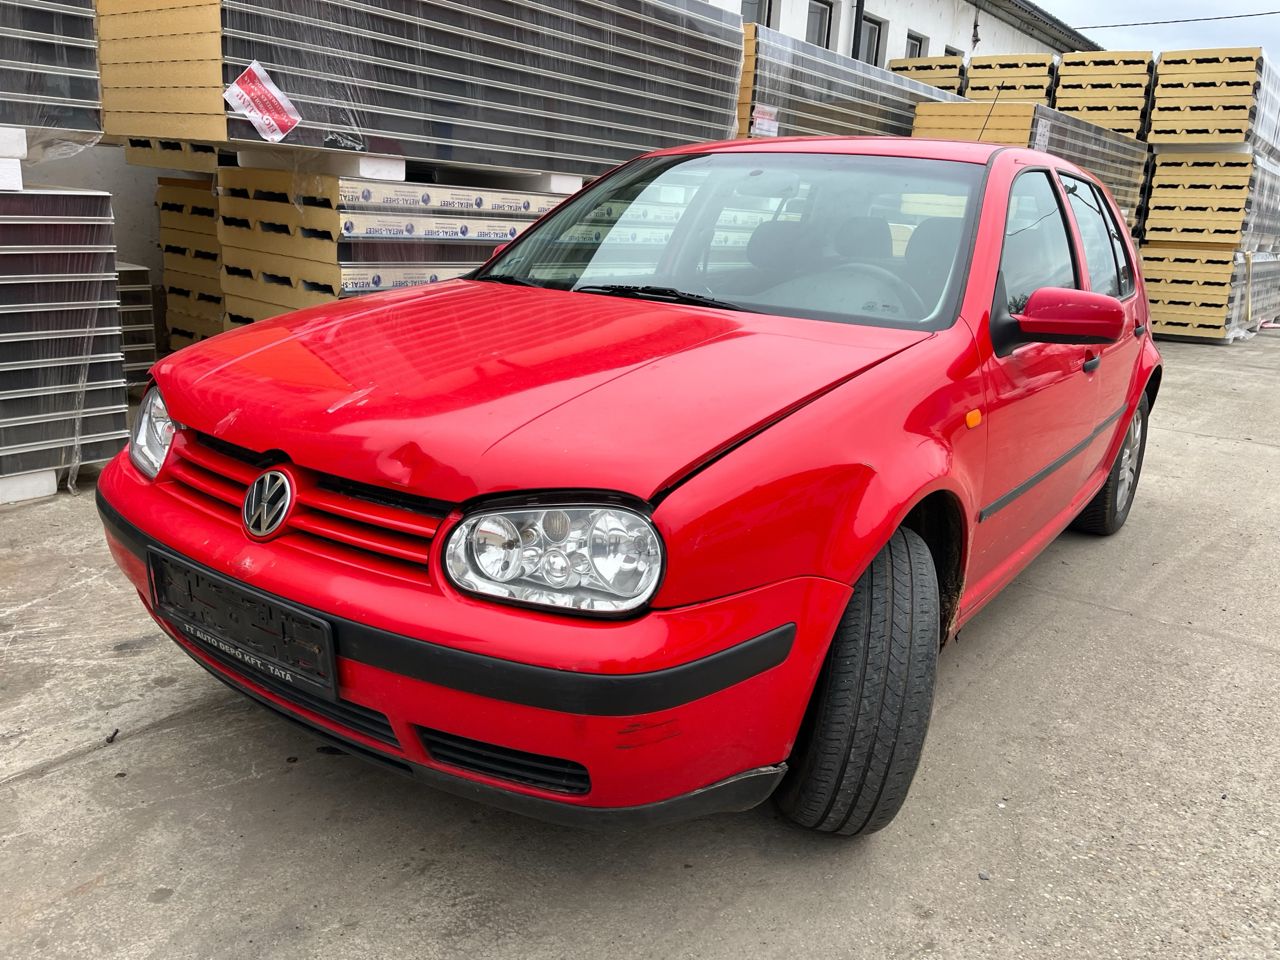 You are currently viewing M014, VolksWagen Golf IV.